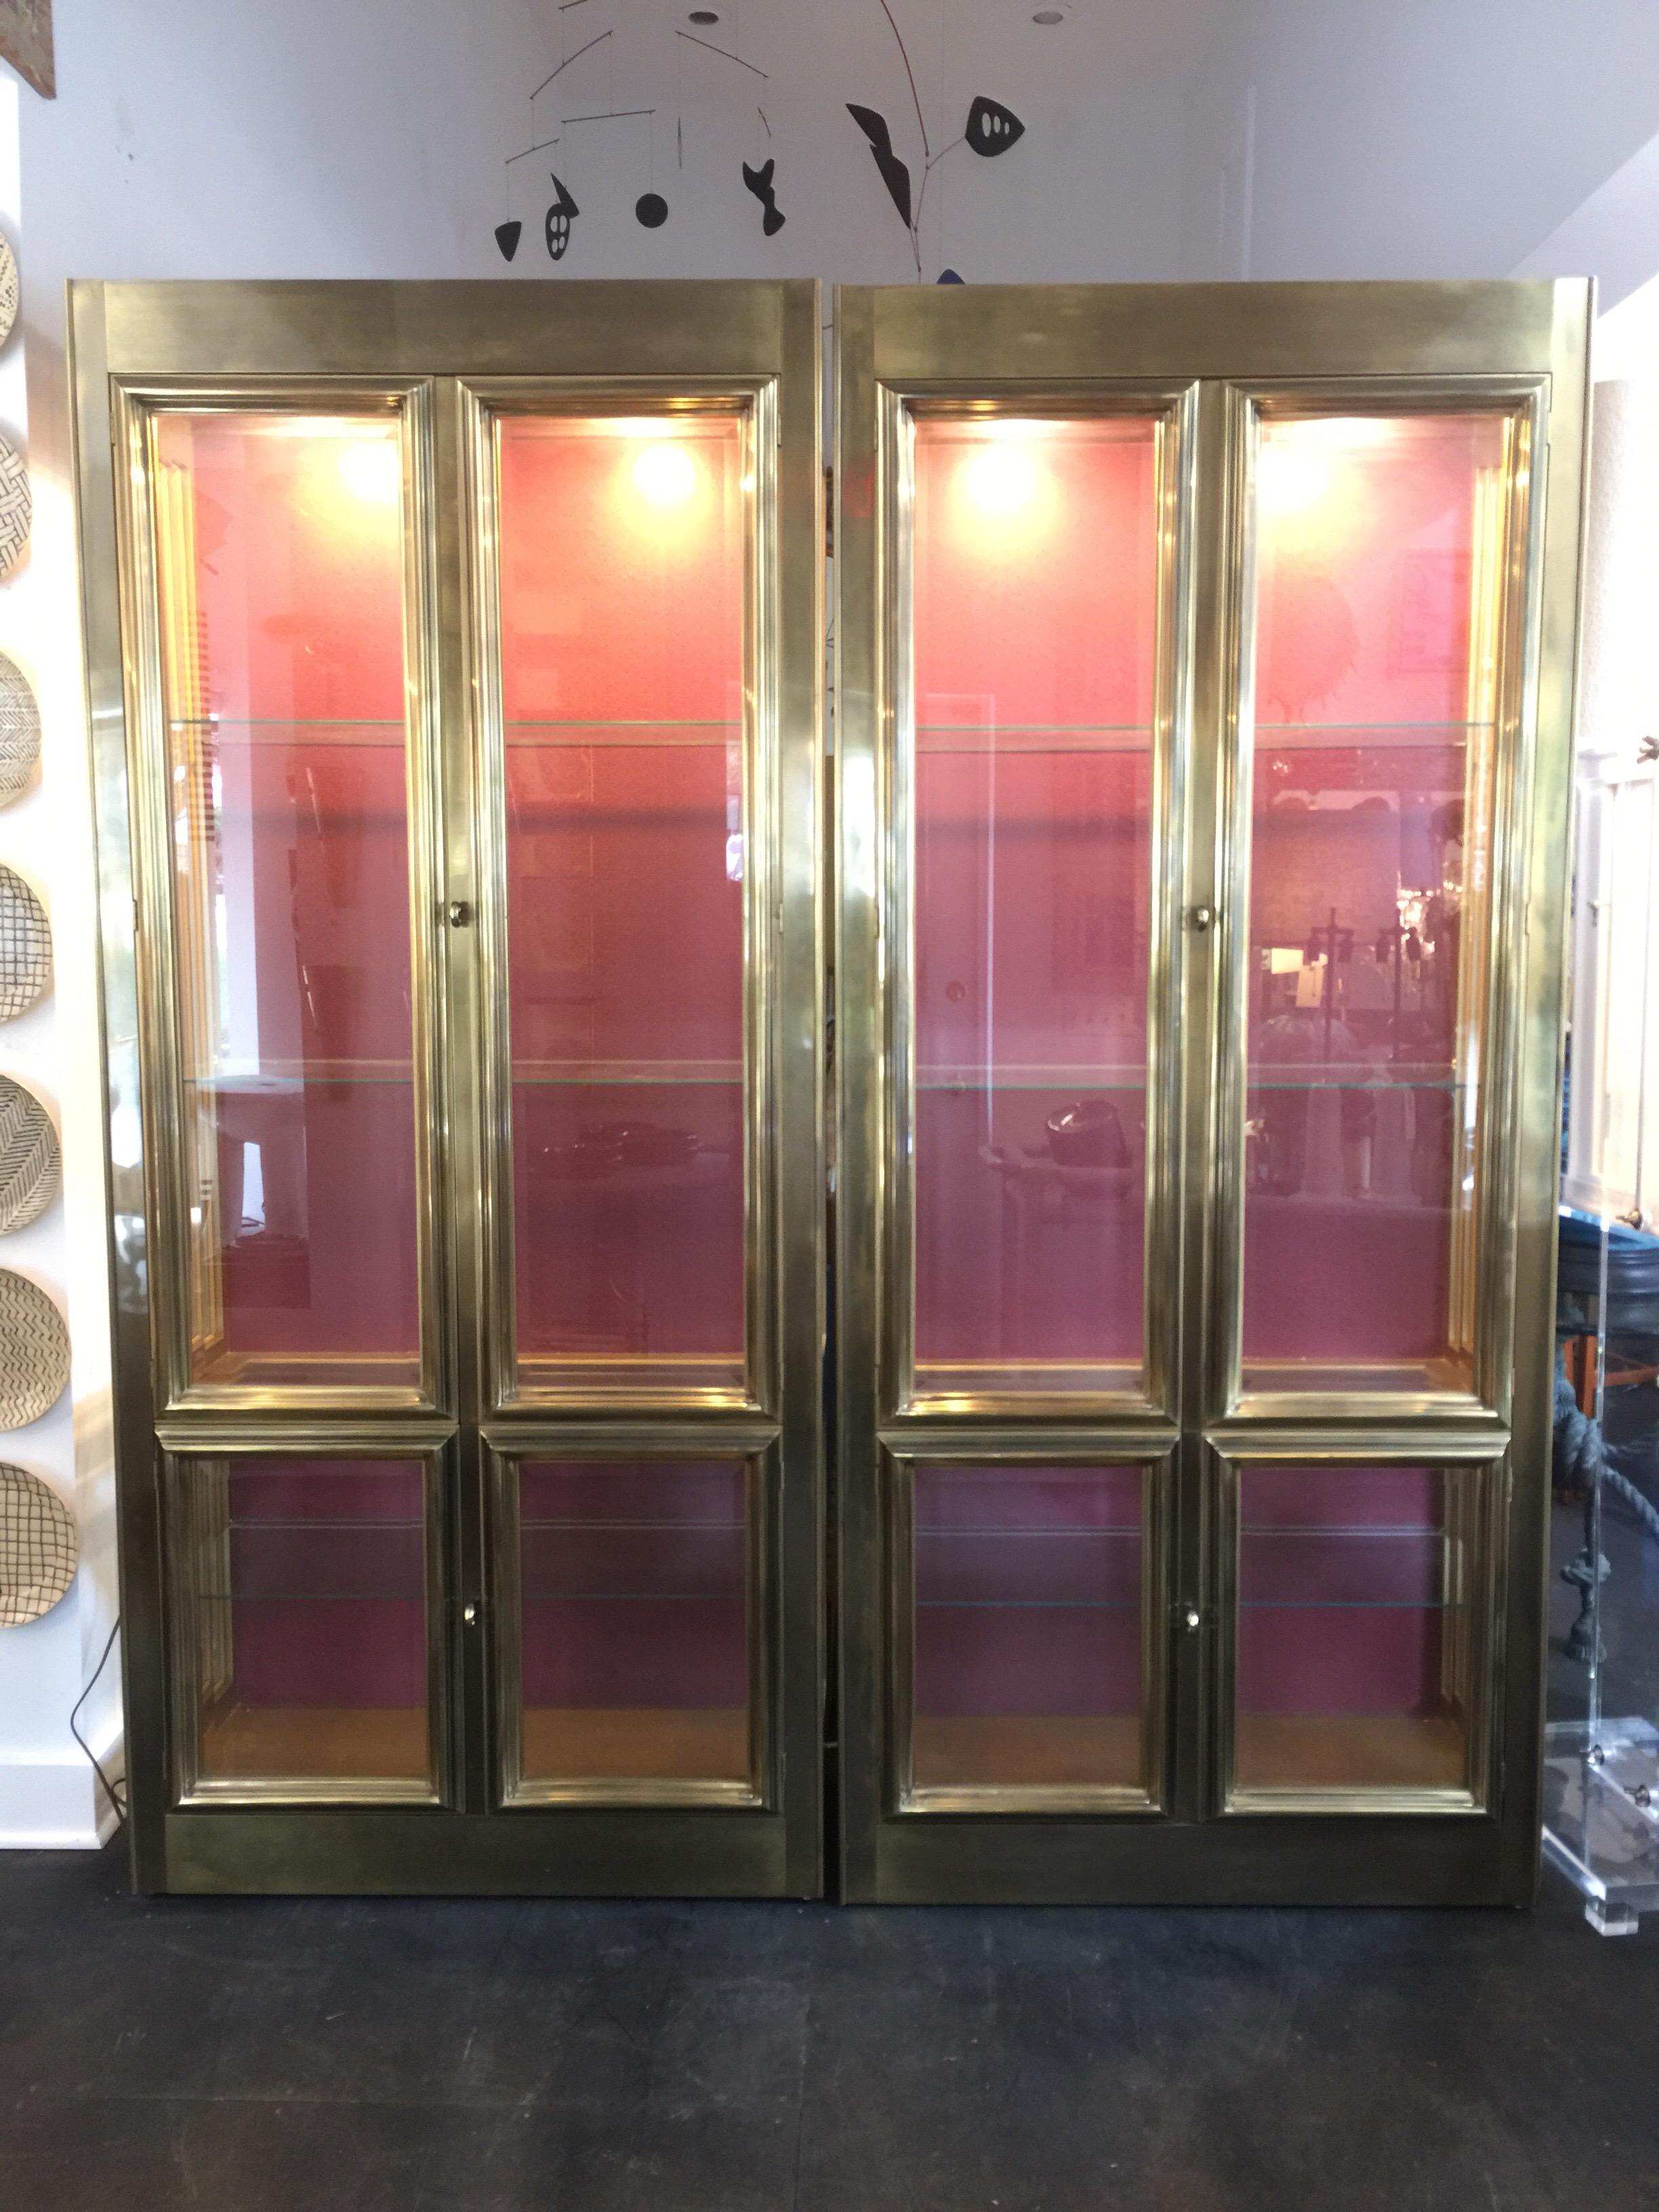 Pair of brass mastercraft cabinets / vitrines with bevelled glass doors and four interior adjustable shelves. Wonderful brass molding throughout - two downlights in each cabinet.

American, circa 1970s. Having four doors/ four glass shelves and